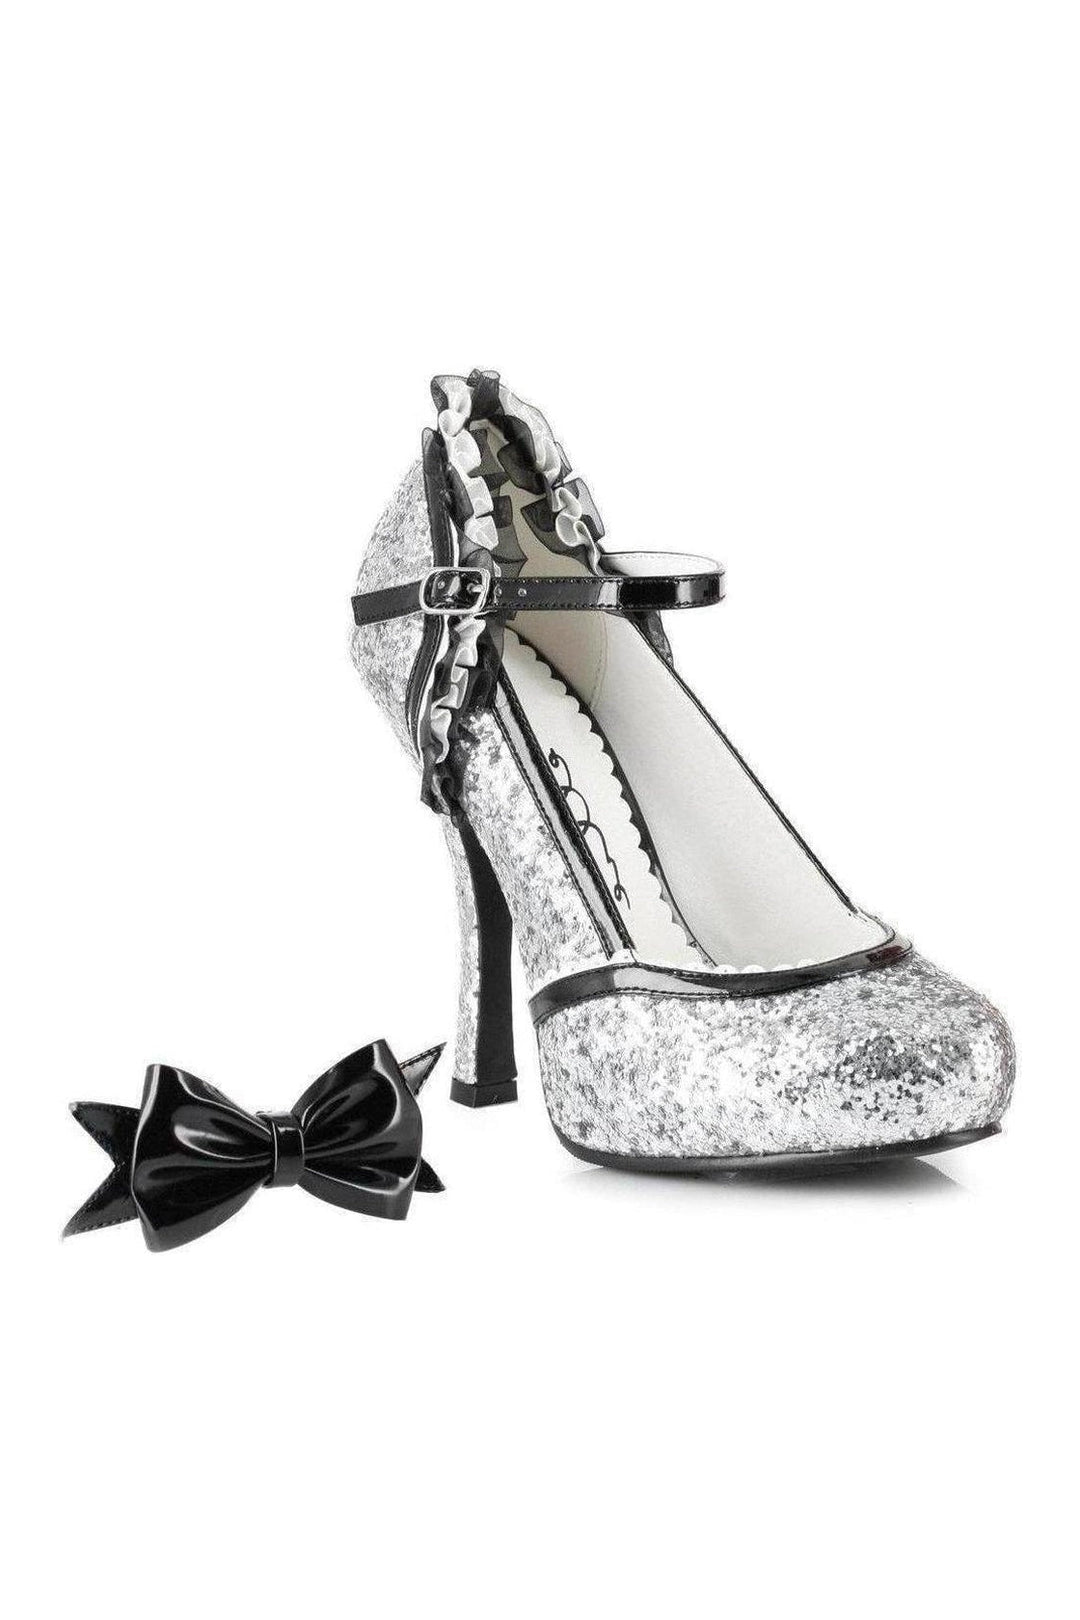 453-LACEY Costume Pump | Silver Glitter-Ellie Shoes-SEXYSHOES.COM